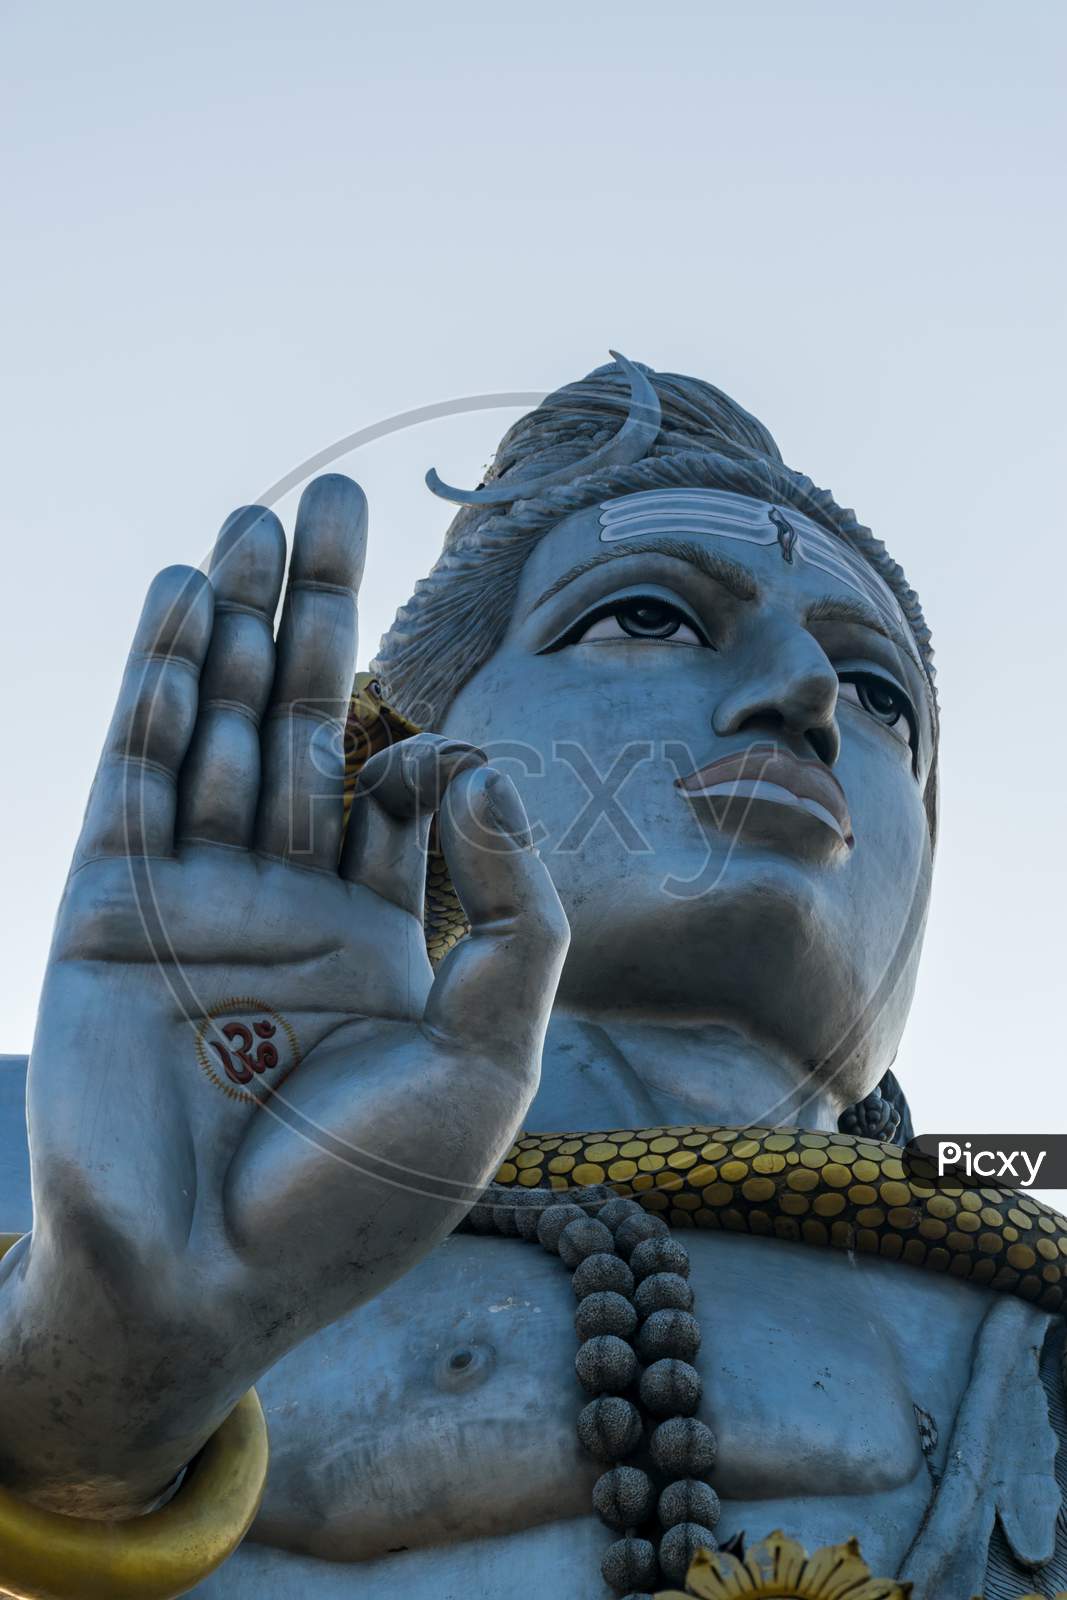 Portrait View Of The Second Tallest Lord Shiva Statue In The World Located At Murdeshwar, Karnataka, India